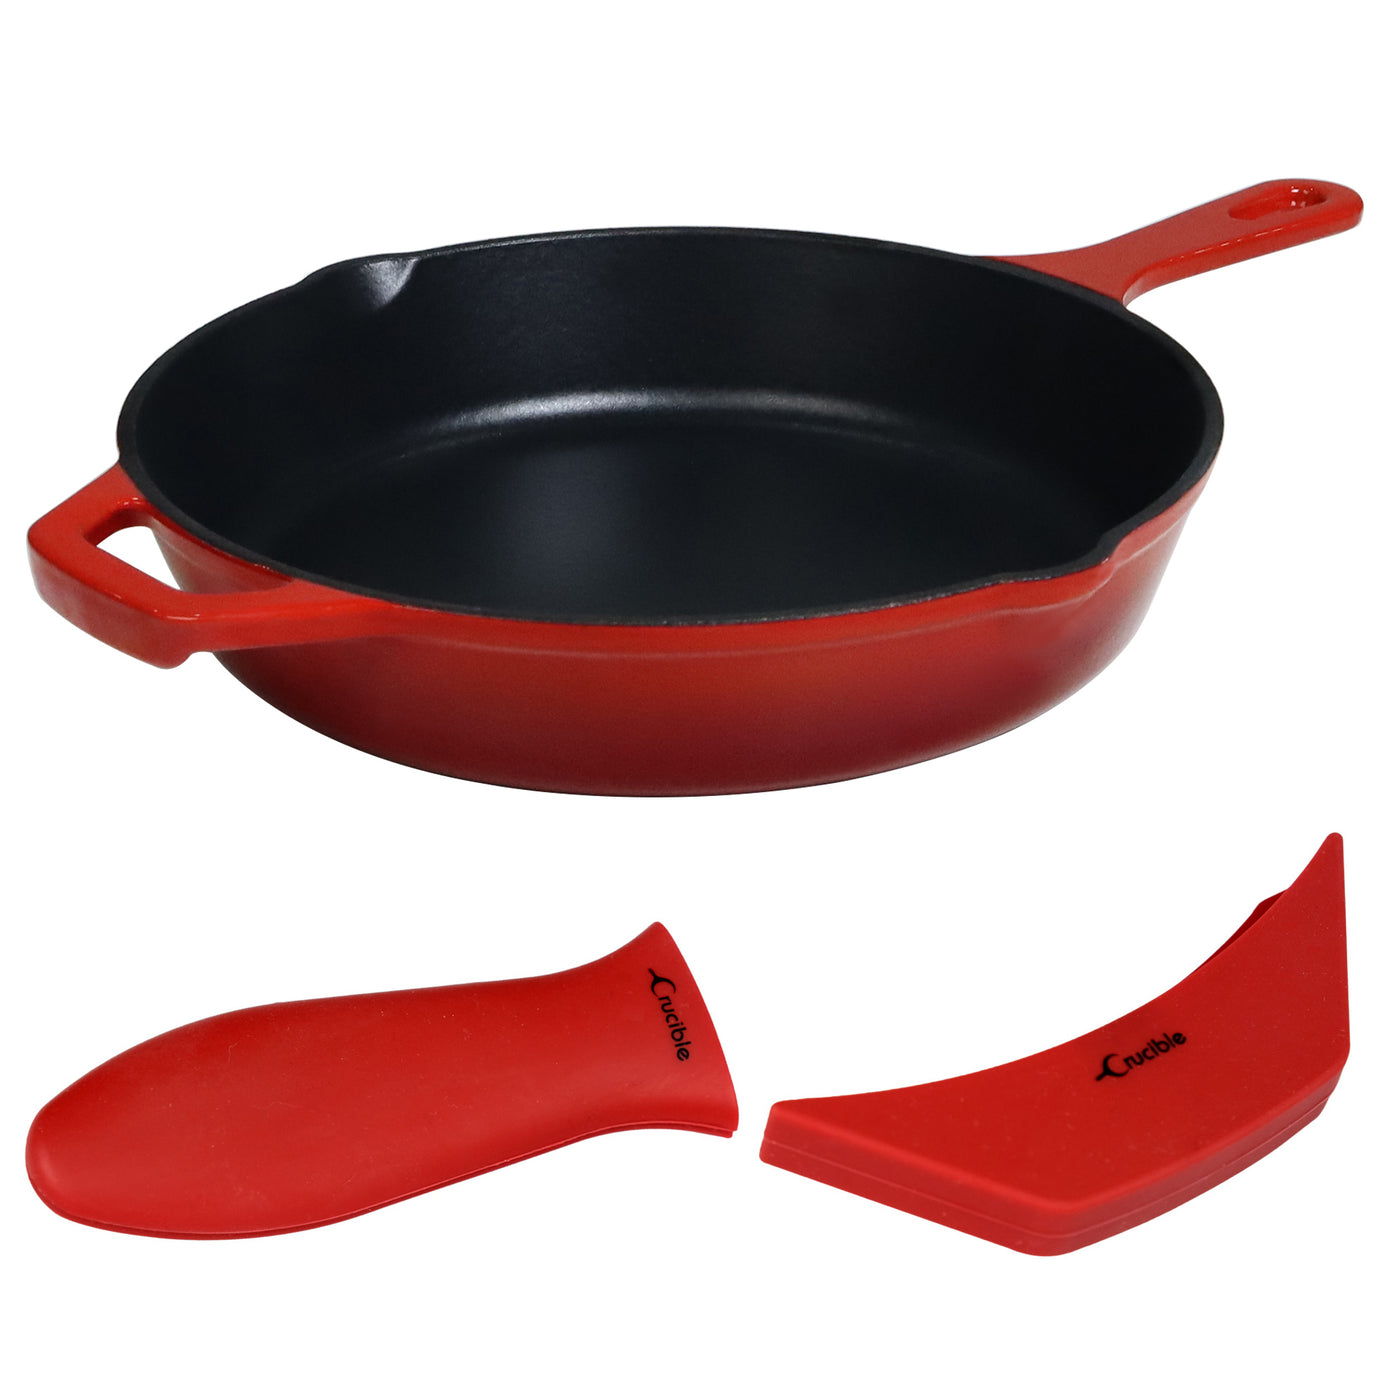 Crucible Cookware Silicone Hot Handle Holder (2-Pack) for Cast Iron Woks, Pots, Dutch Ovens, Small Skillets, Assist Handle, Oven Trays, Plates - Potholders - Red